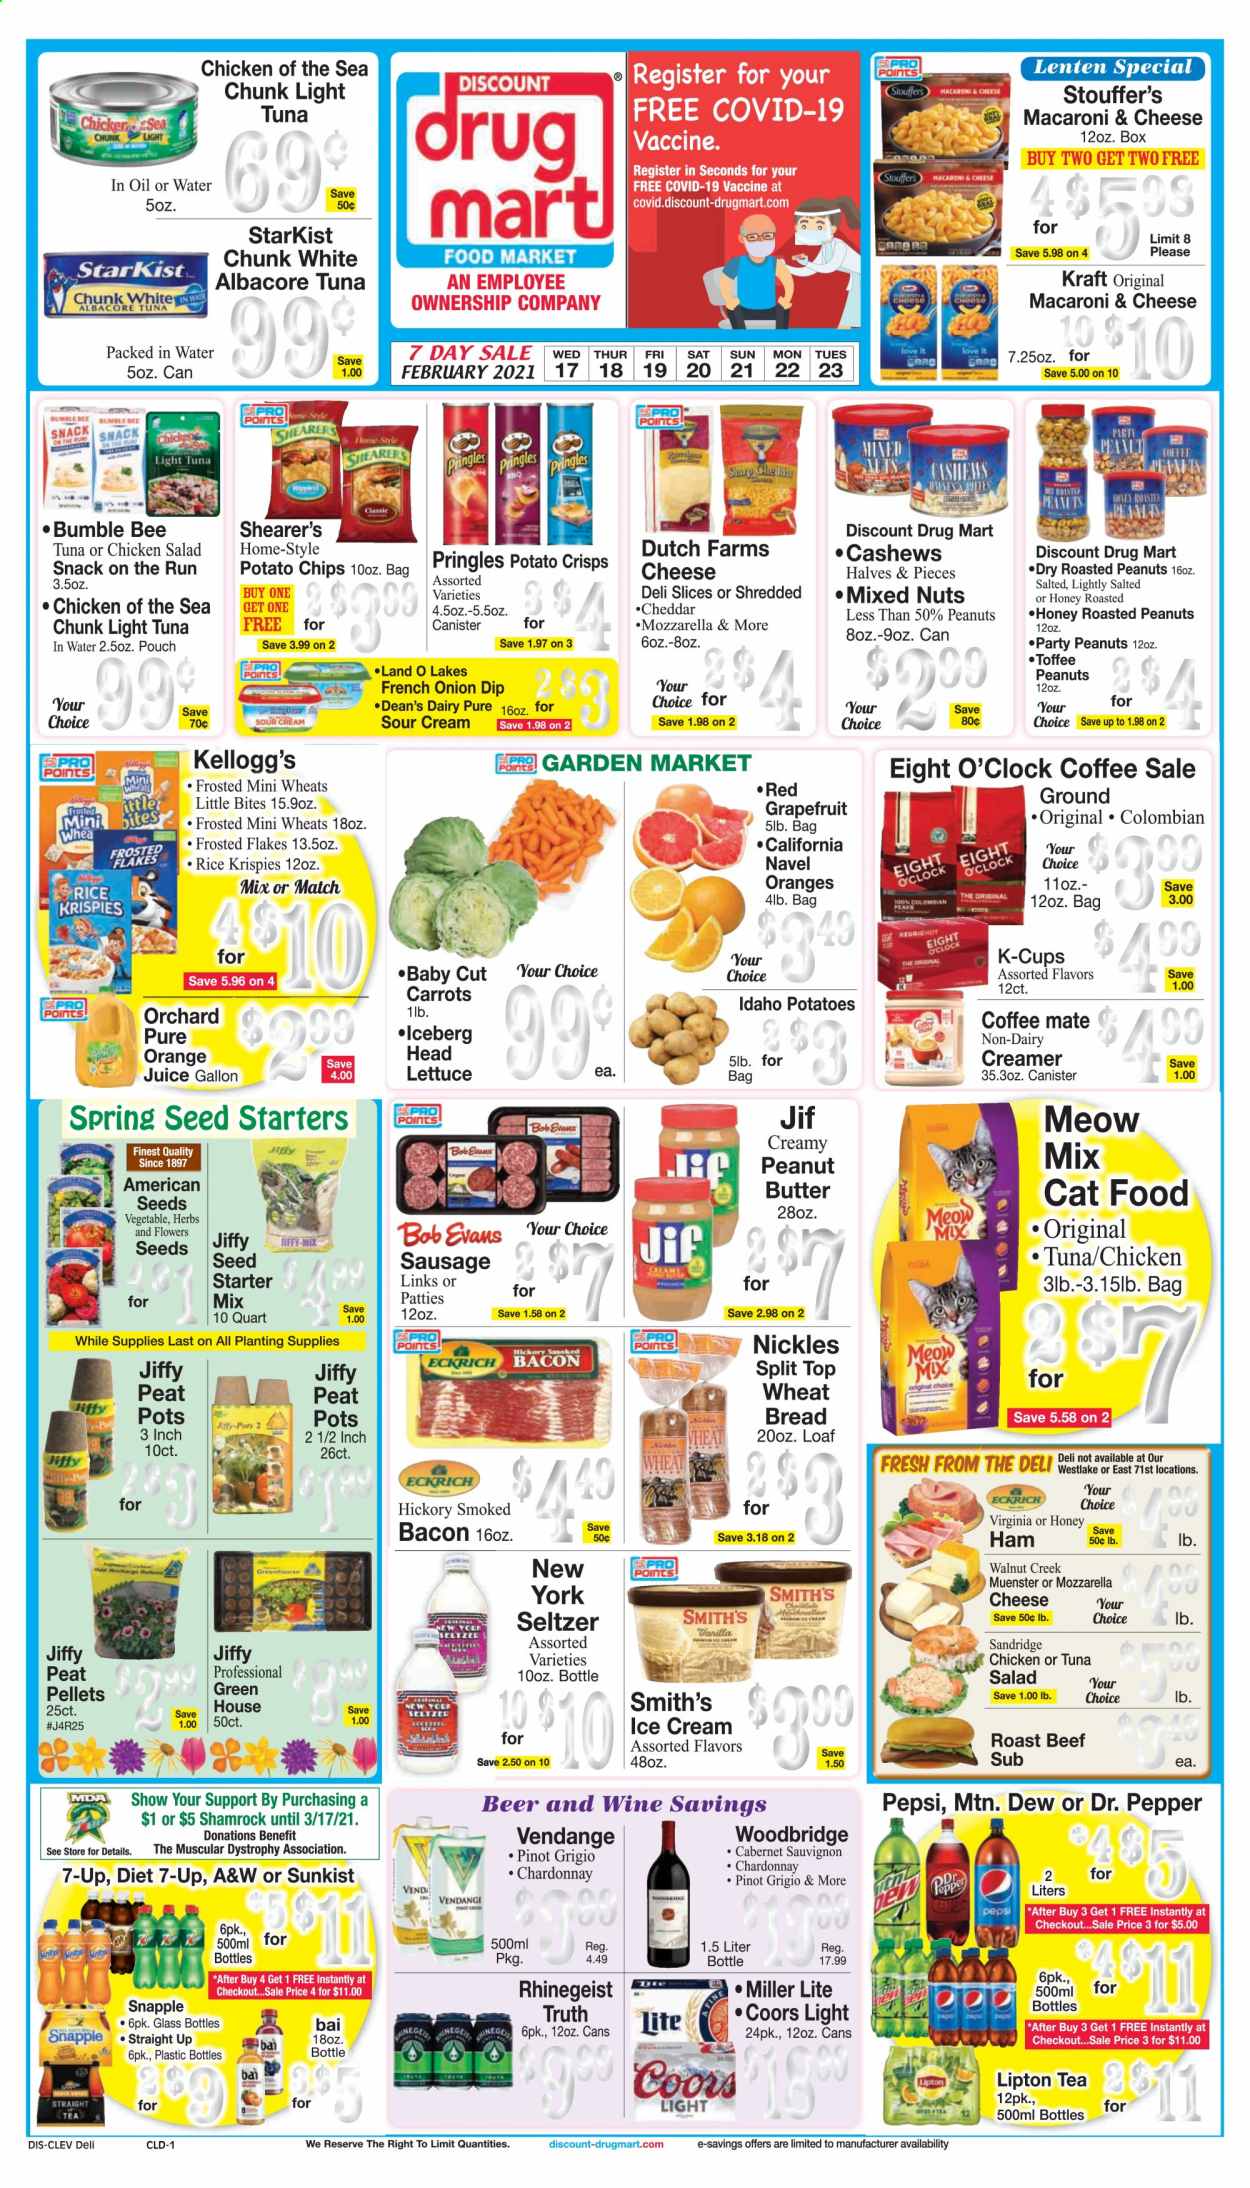 thumbnail - Discount Drug Mart Flyer - 02/17/2021 - 02/23/2021 - Sales products - wheat bread, Little Bites, tuna, StarKist, macaroni & cheese, salad, Kraft®, Bob Evans, bacon, ham, sausage, tuna salad, chicken salad, mozzarella, Münster cheese, Coffee-Mate, sour cream, non dairy creamer, creamer, dip, ice cream, carrots, lettuce, Stouffer's, toffee, Kellogg's, Shearer’s, potato crisps, potato chips, Pringles, chips, snack, Smith's, tuna in water, light tuna, Chicken of the Sea, Rice Krispies, Frosted Flakes, herbs, peanut butter, Jif, cashews, roasted peanuts, walnuts, mixed nuts, Mountain Dew, Pepsi, orange juice, juice, Lipton, Dr. Pepper, 7UP, Snapple, A&W, Bai, seltzer water, tea, coffee capsules, K-Cups, Eight O'Clock, Cabernet Sauvignon, Chardonnay, wine, Pinot Grigio, Woodbridge, Vendange, beer, Miller Lite, Coors, Rhinegeist, beef meat, roast beef, animal food, cat food, Meow Mix, plant seeds, Jiffy, grow pots, peat pellets, grapefruits. Page 1.